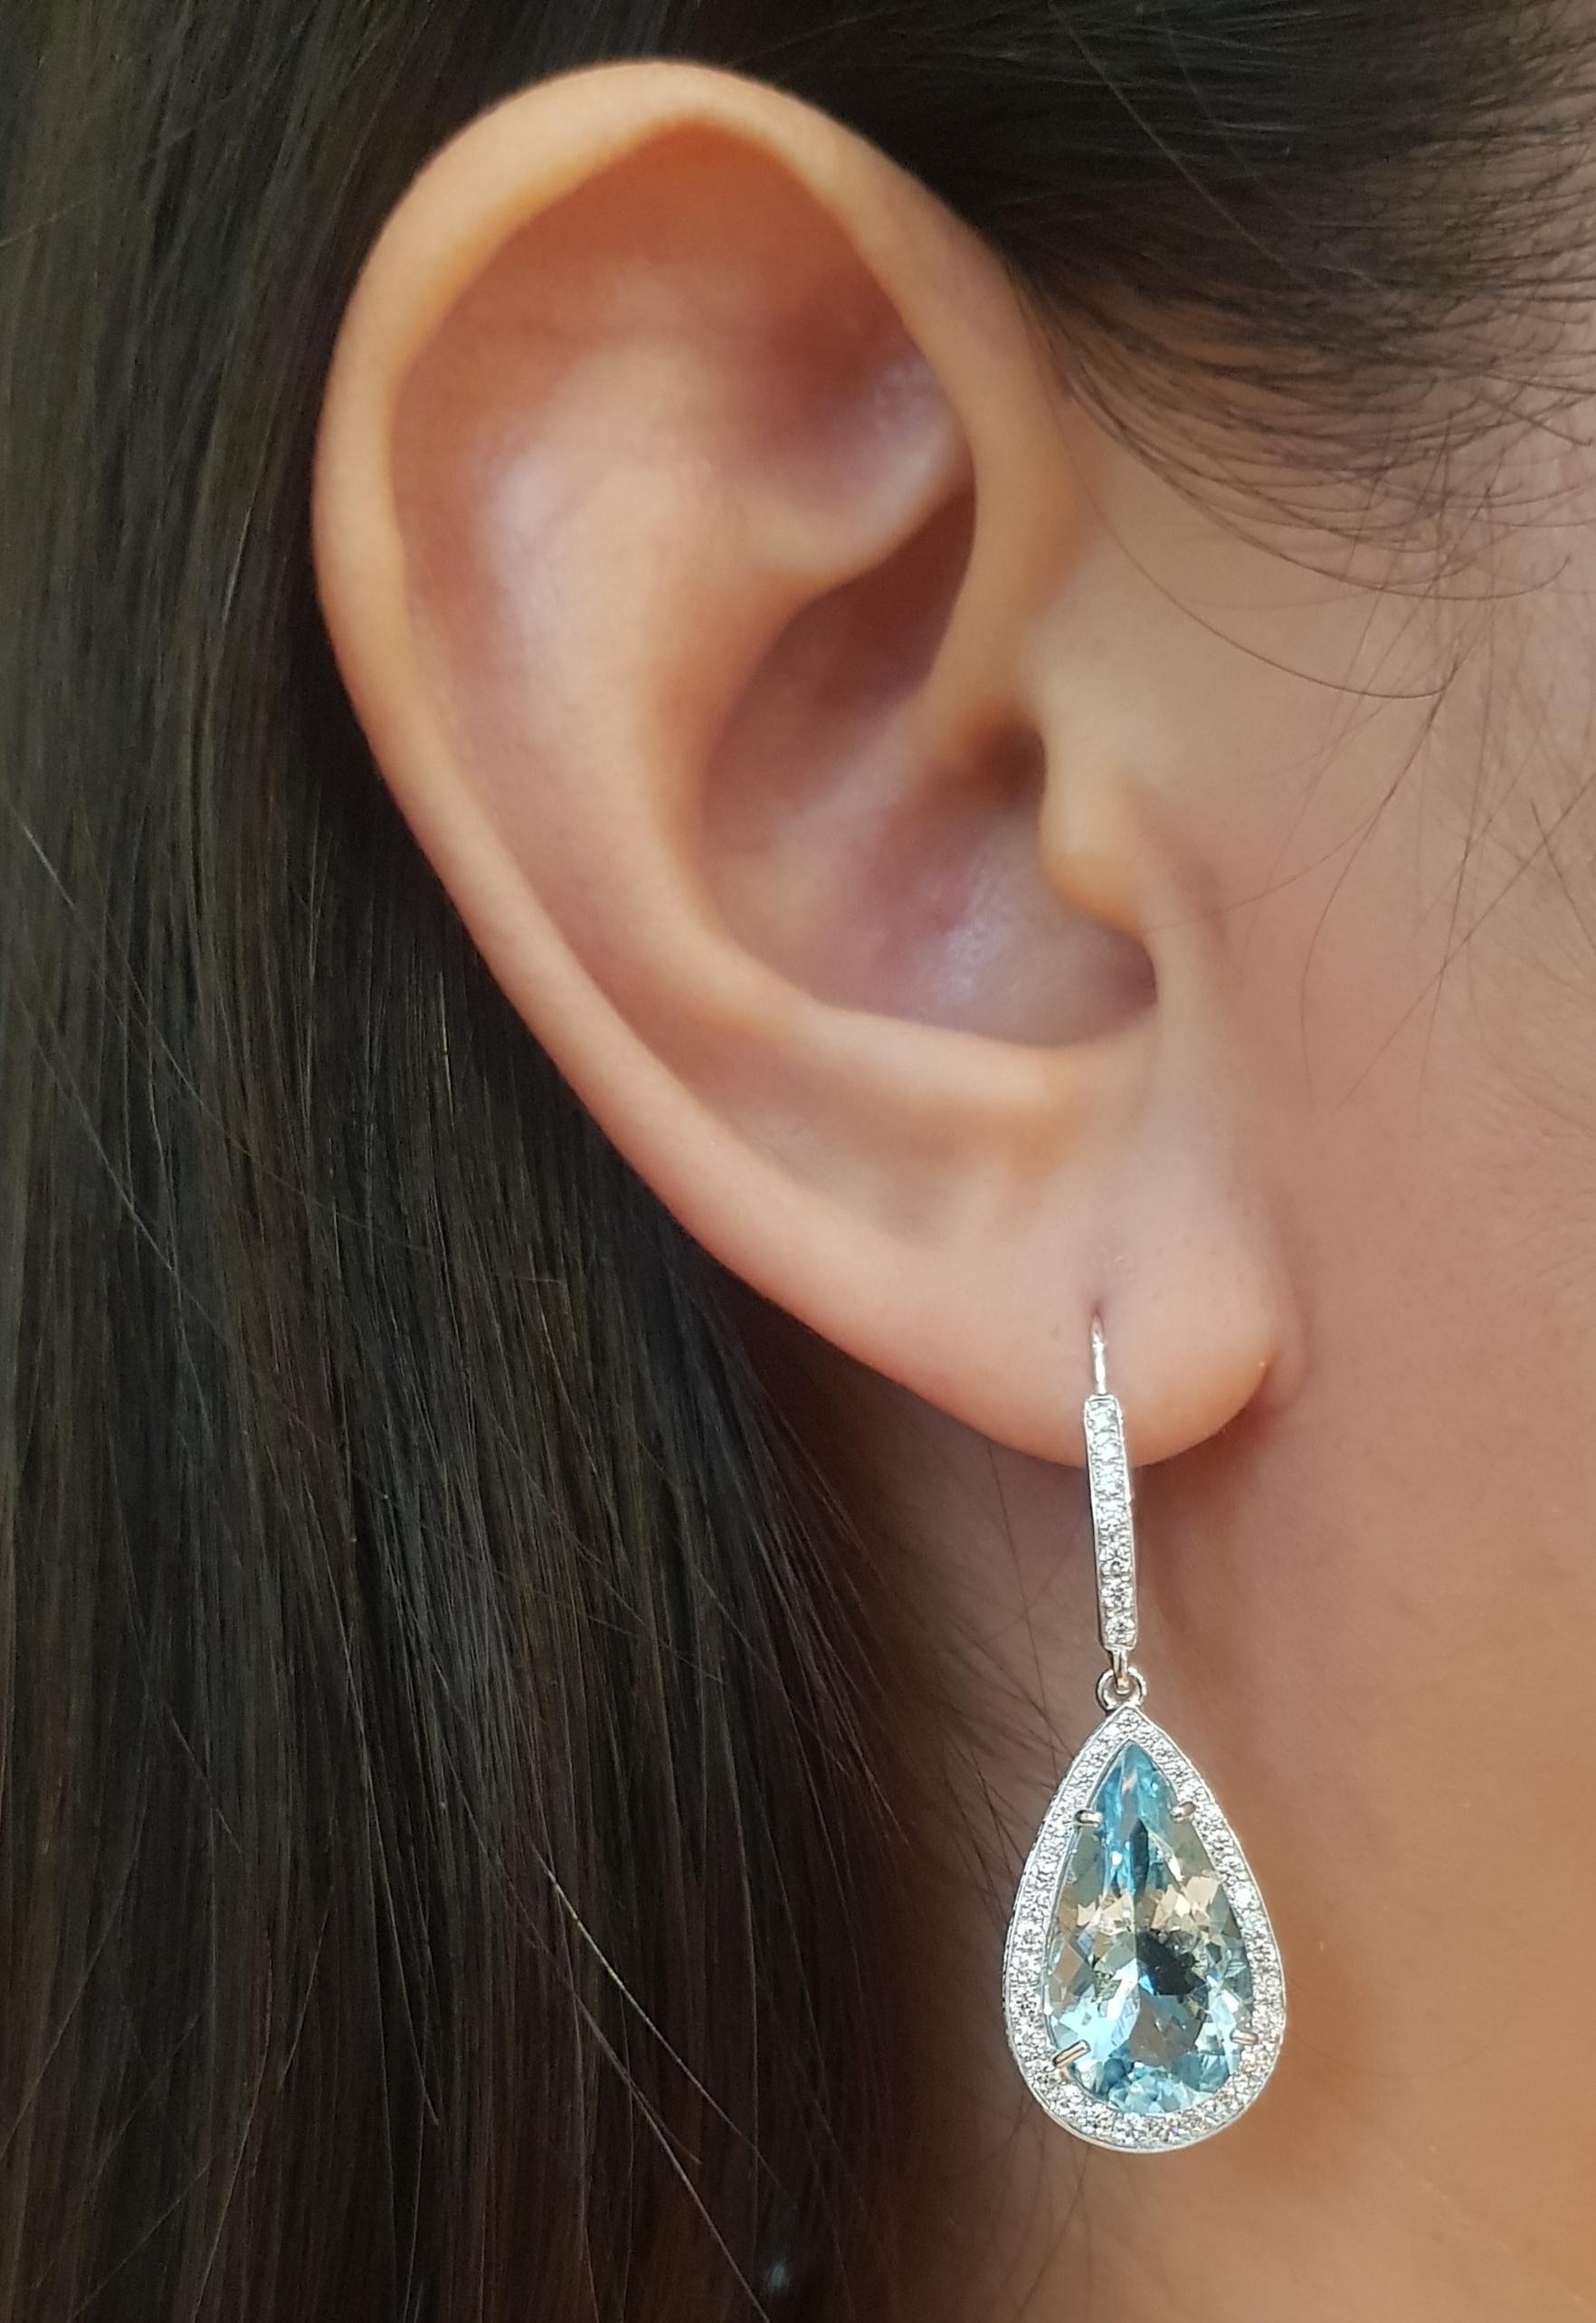 Aquamarine 9.06 carats with Diamond 1.1 carats Earrings set in Platinum 950 Settings

Width: 1.3 cm 
Length: 3.4 cm
Total Weight: 7.81 grams

